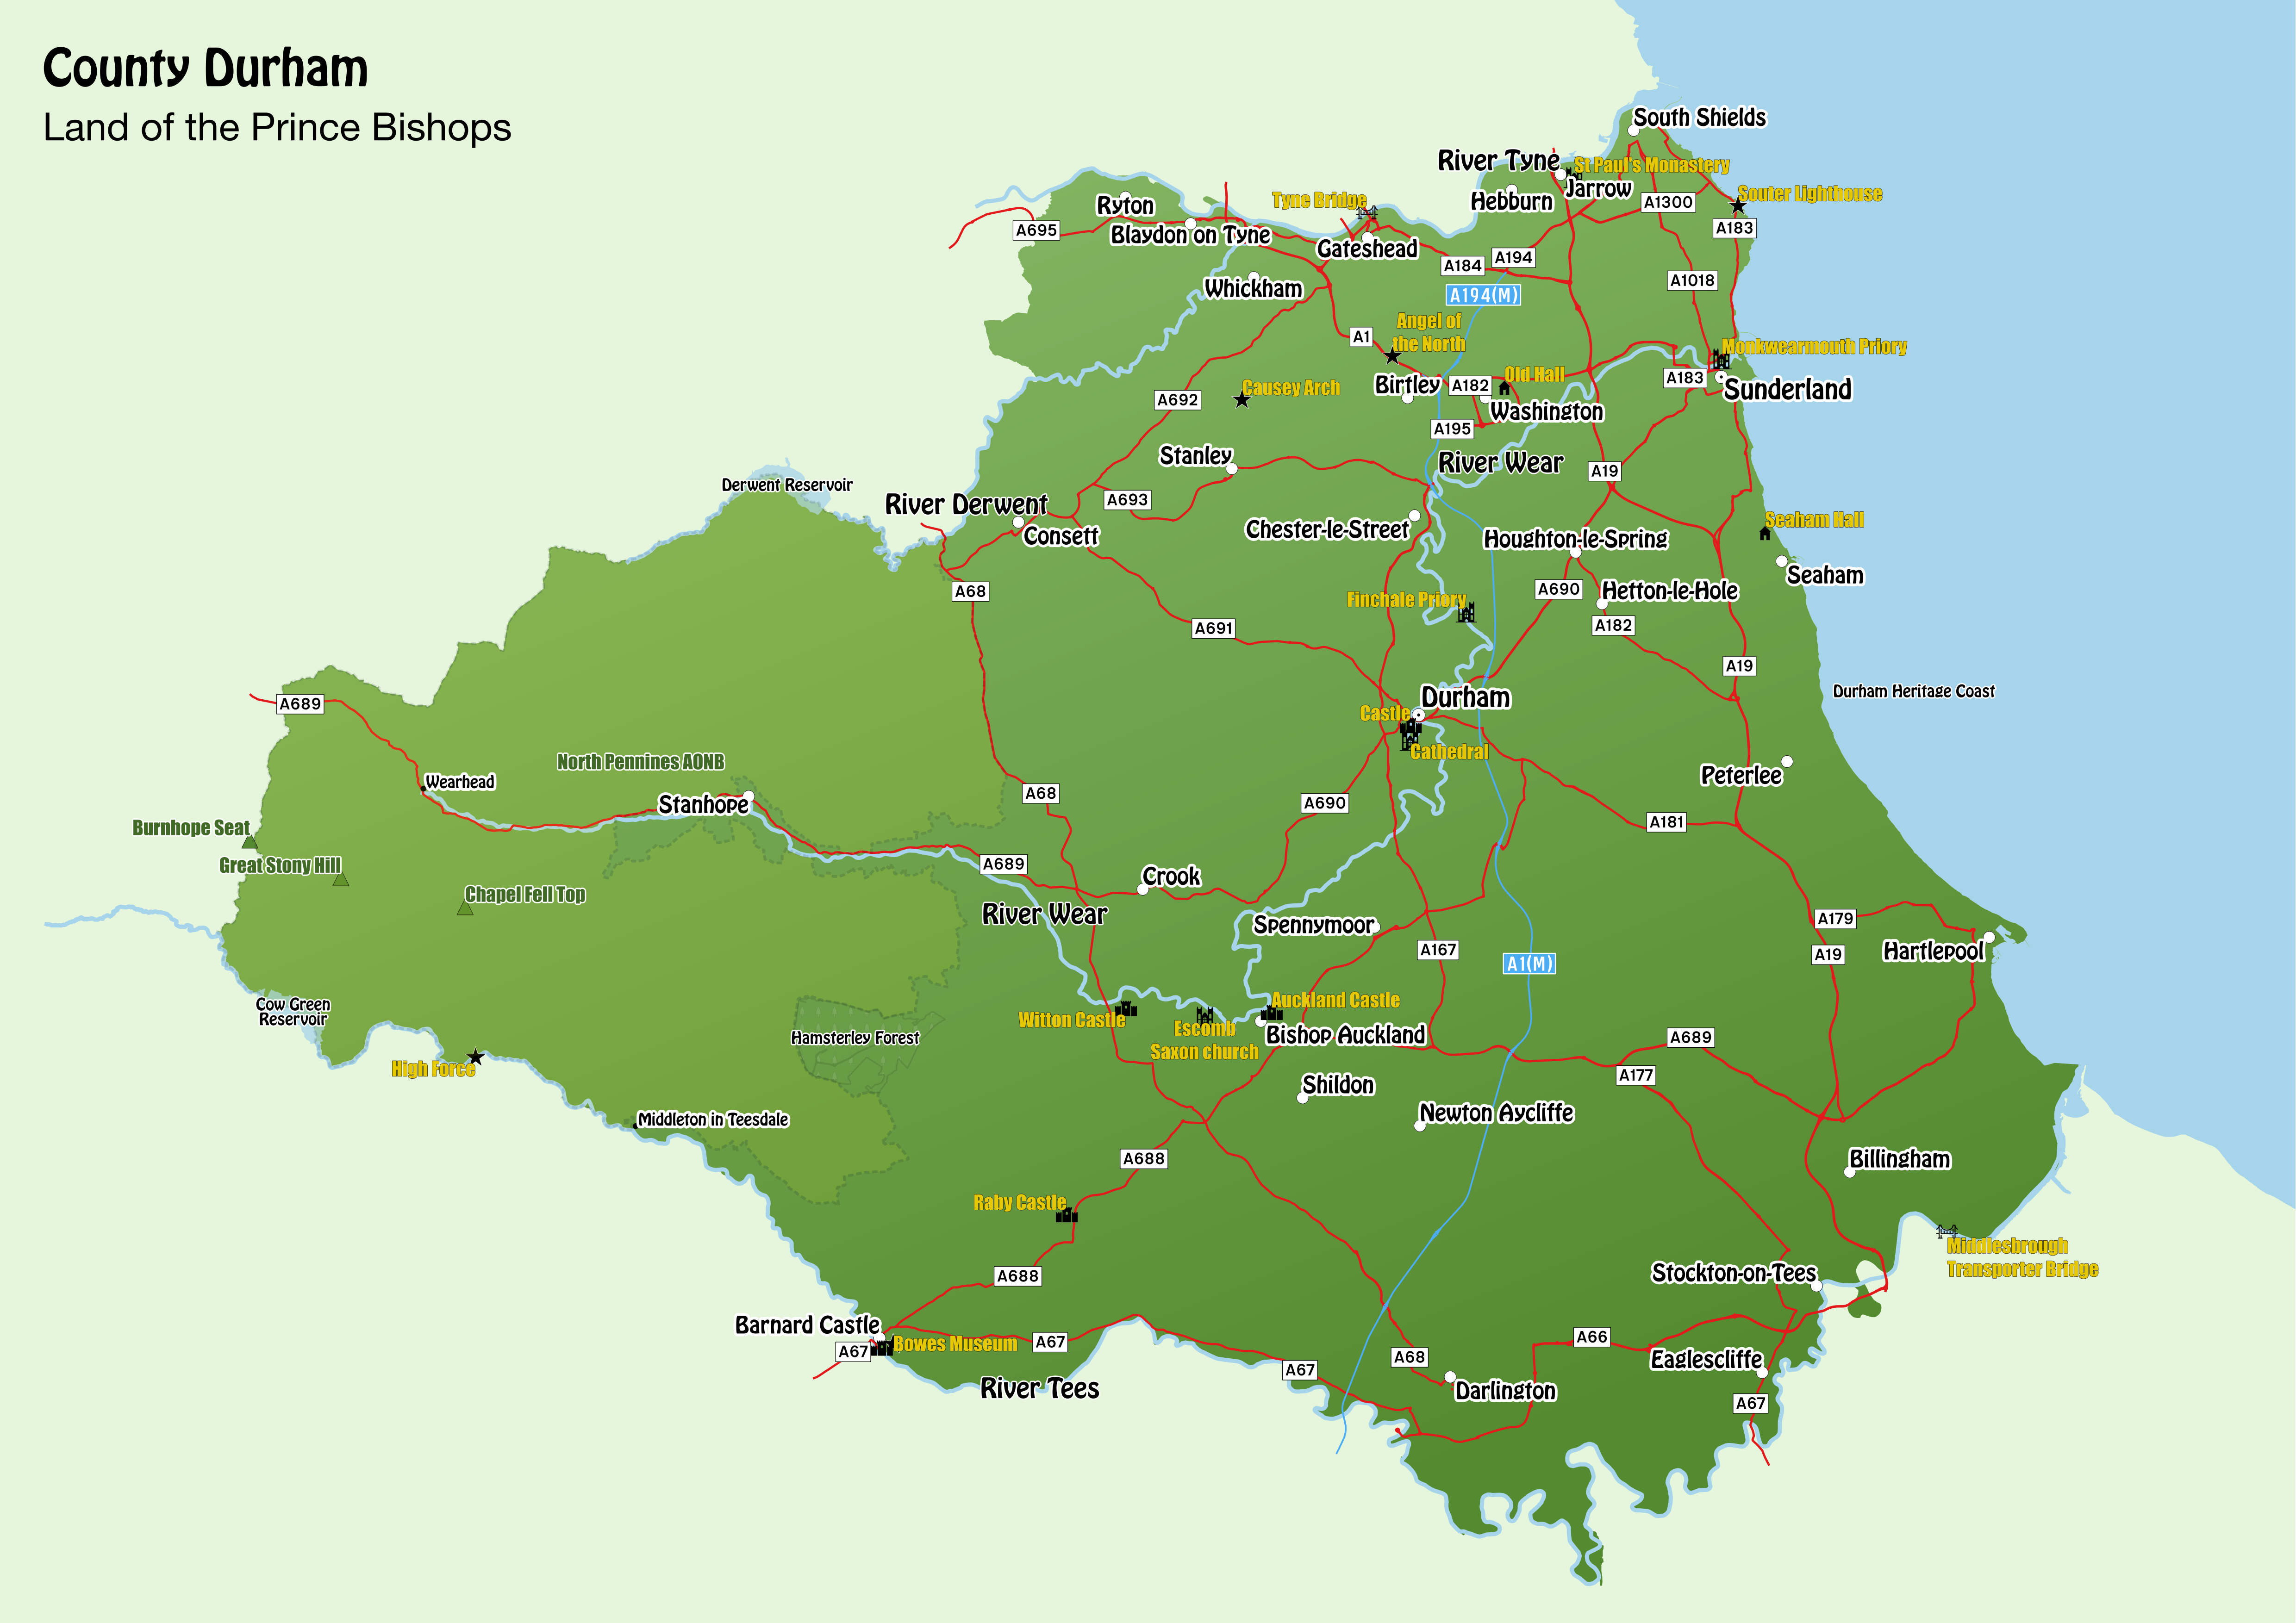 Places of Interest in County Durham